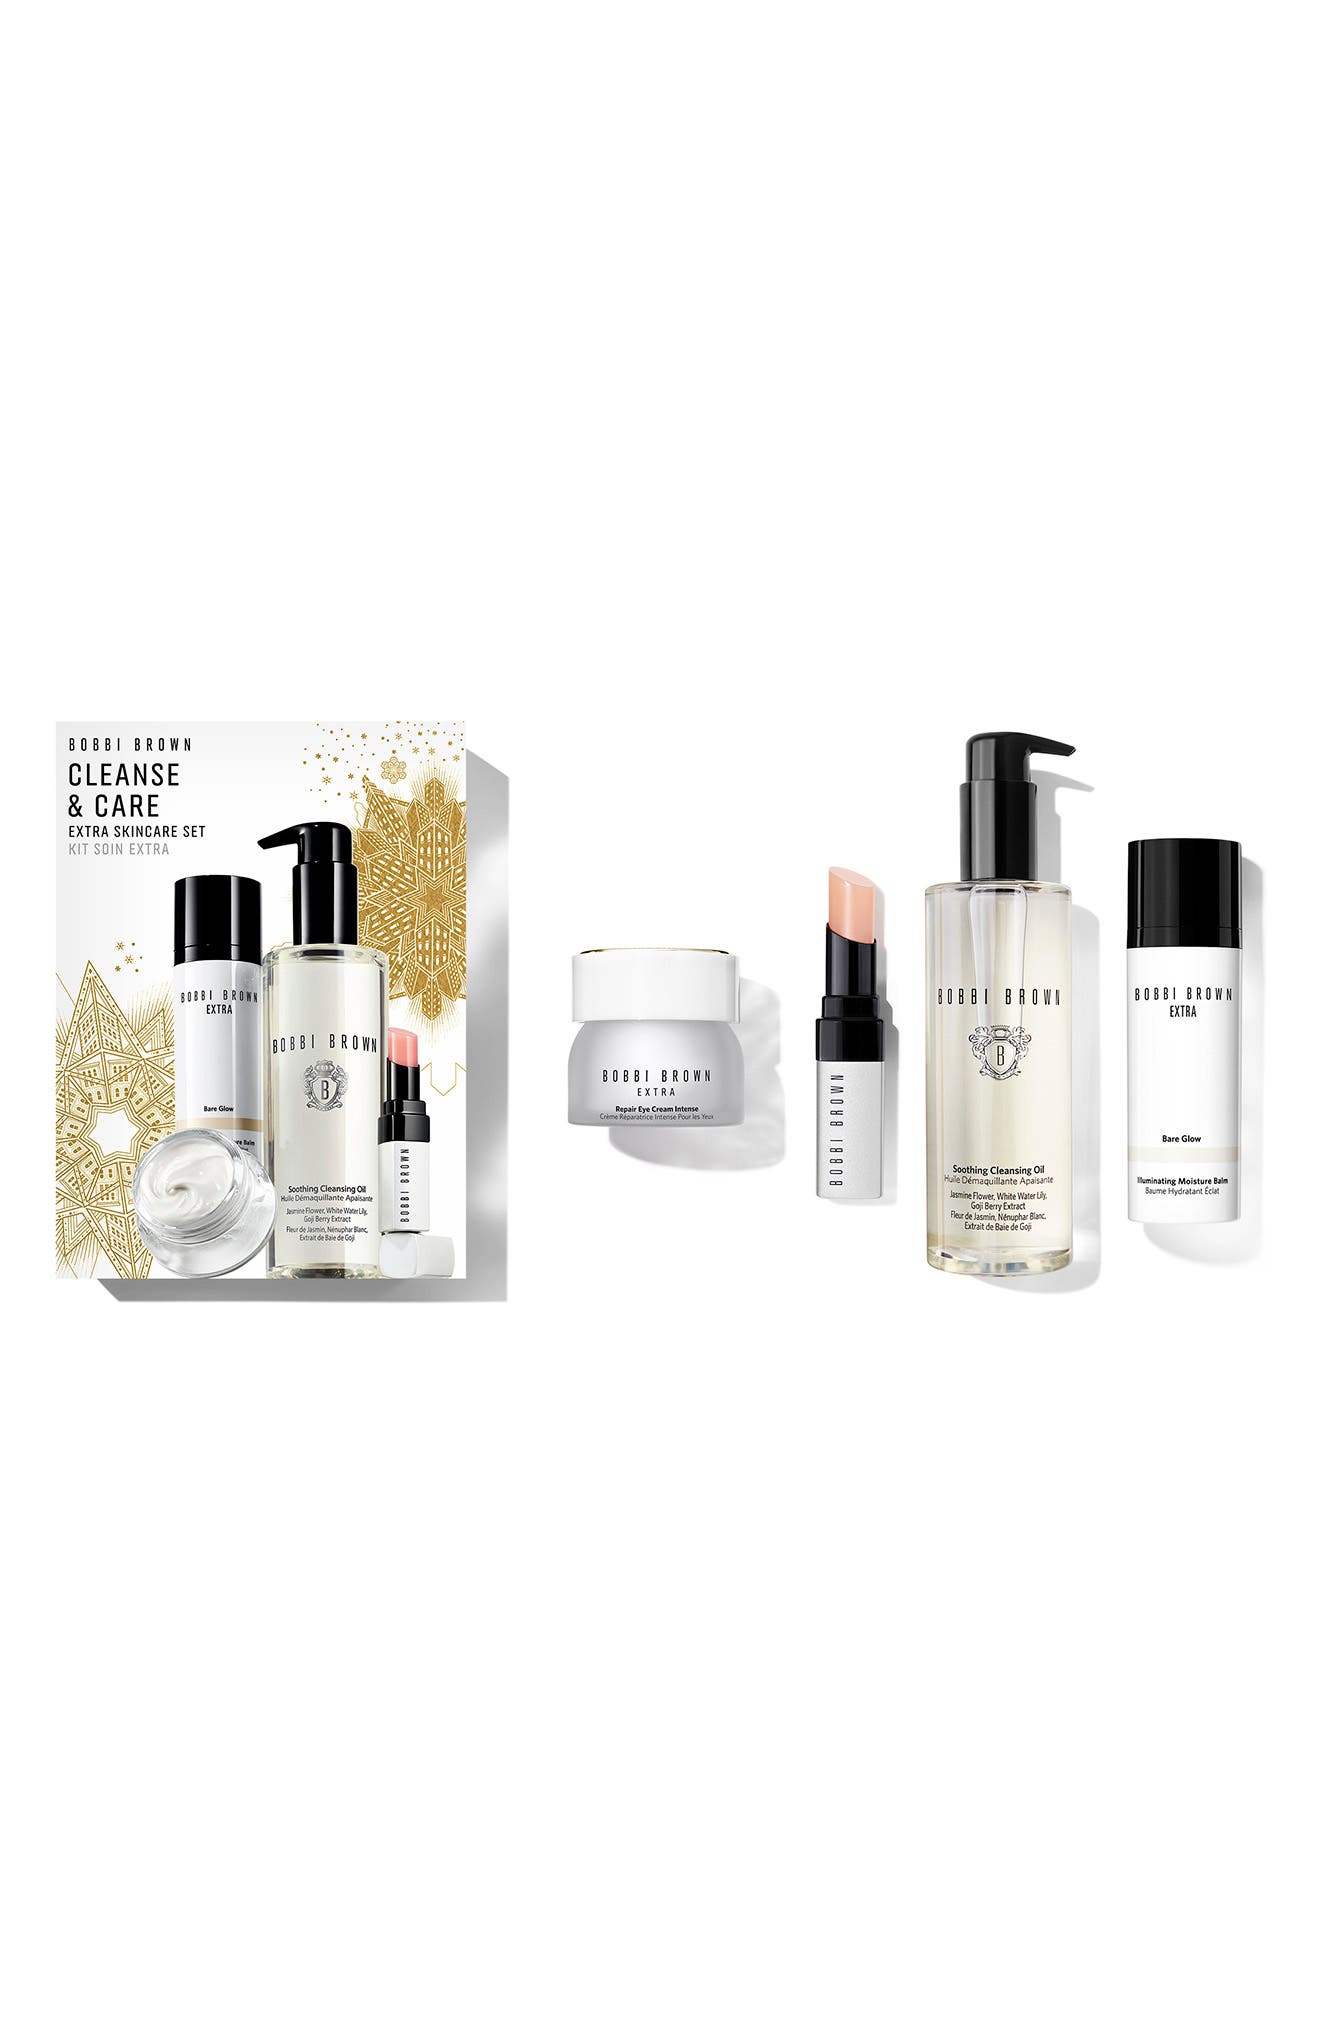 Bobbi Brown Full Size Cleanse & Care Extra Skin Care Set USD $233 Value at Nordstrom